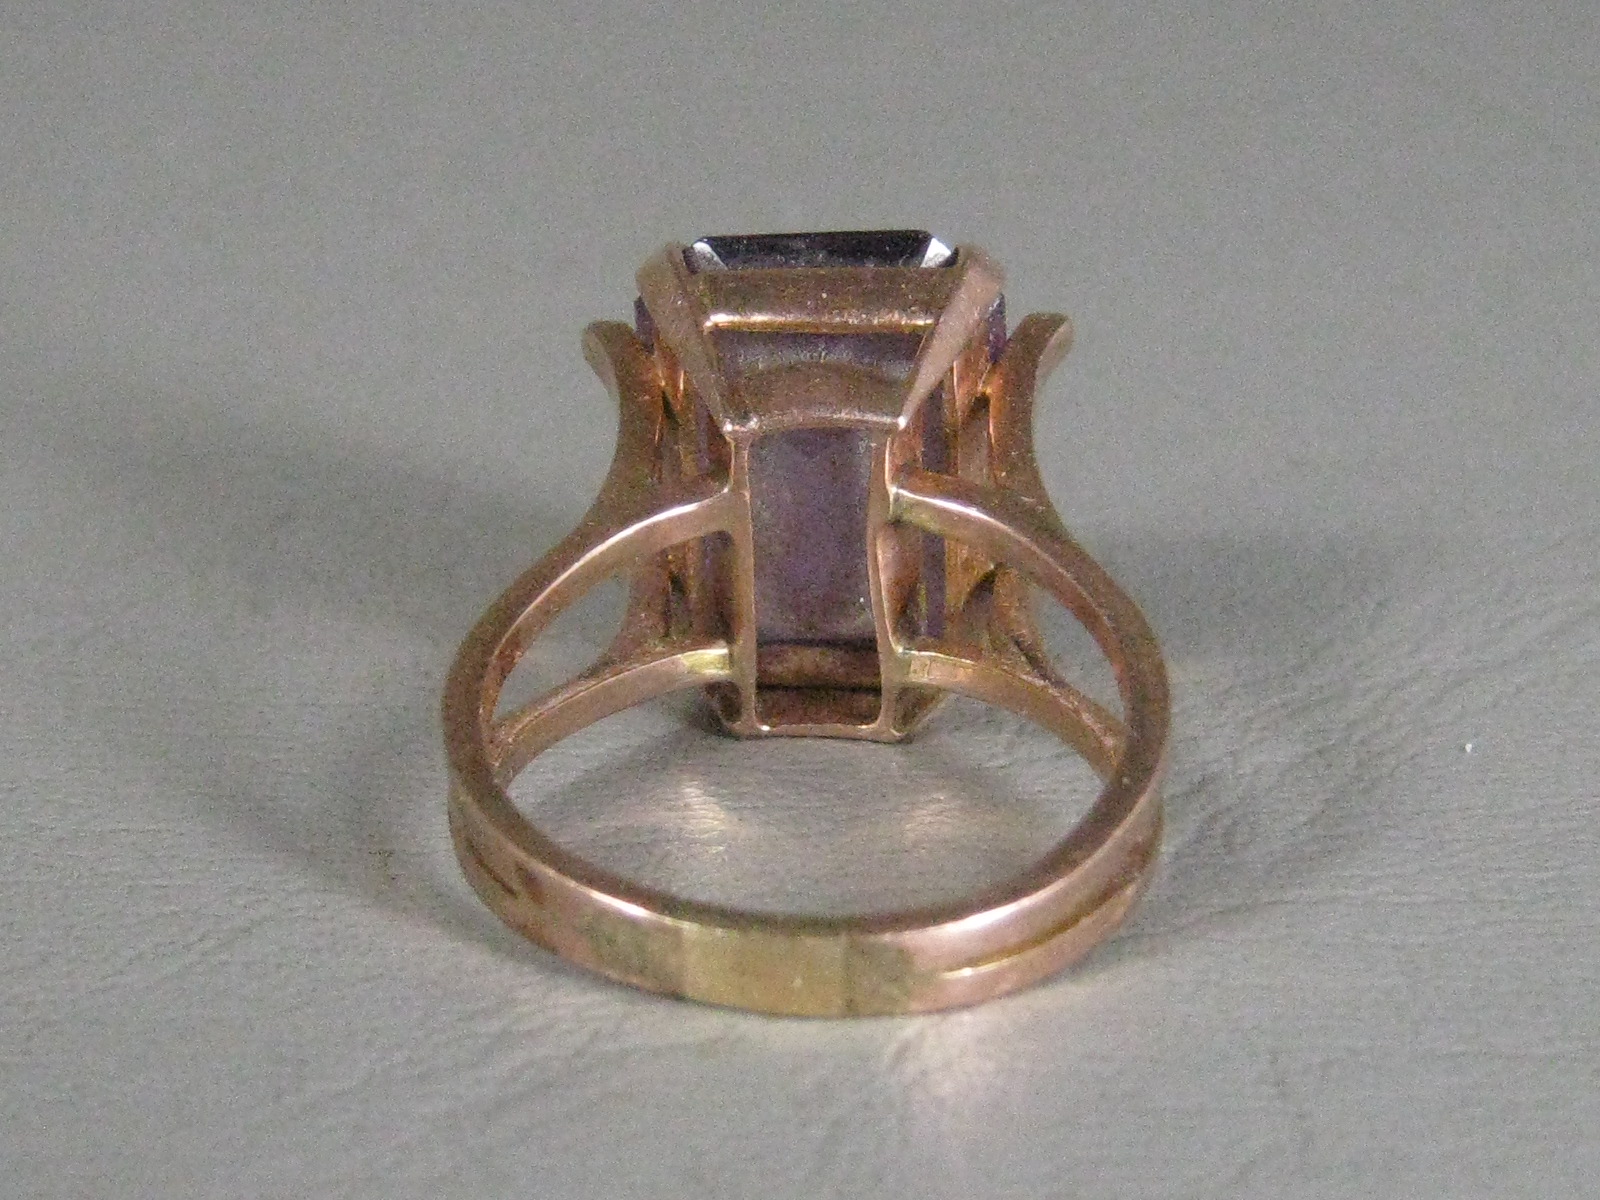 Vintage Antique Amethyst Ring Size 8.25 Estate Jewelry Rose Gold? No Reserve! 10